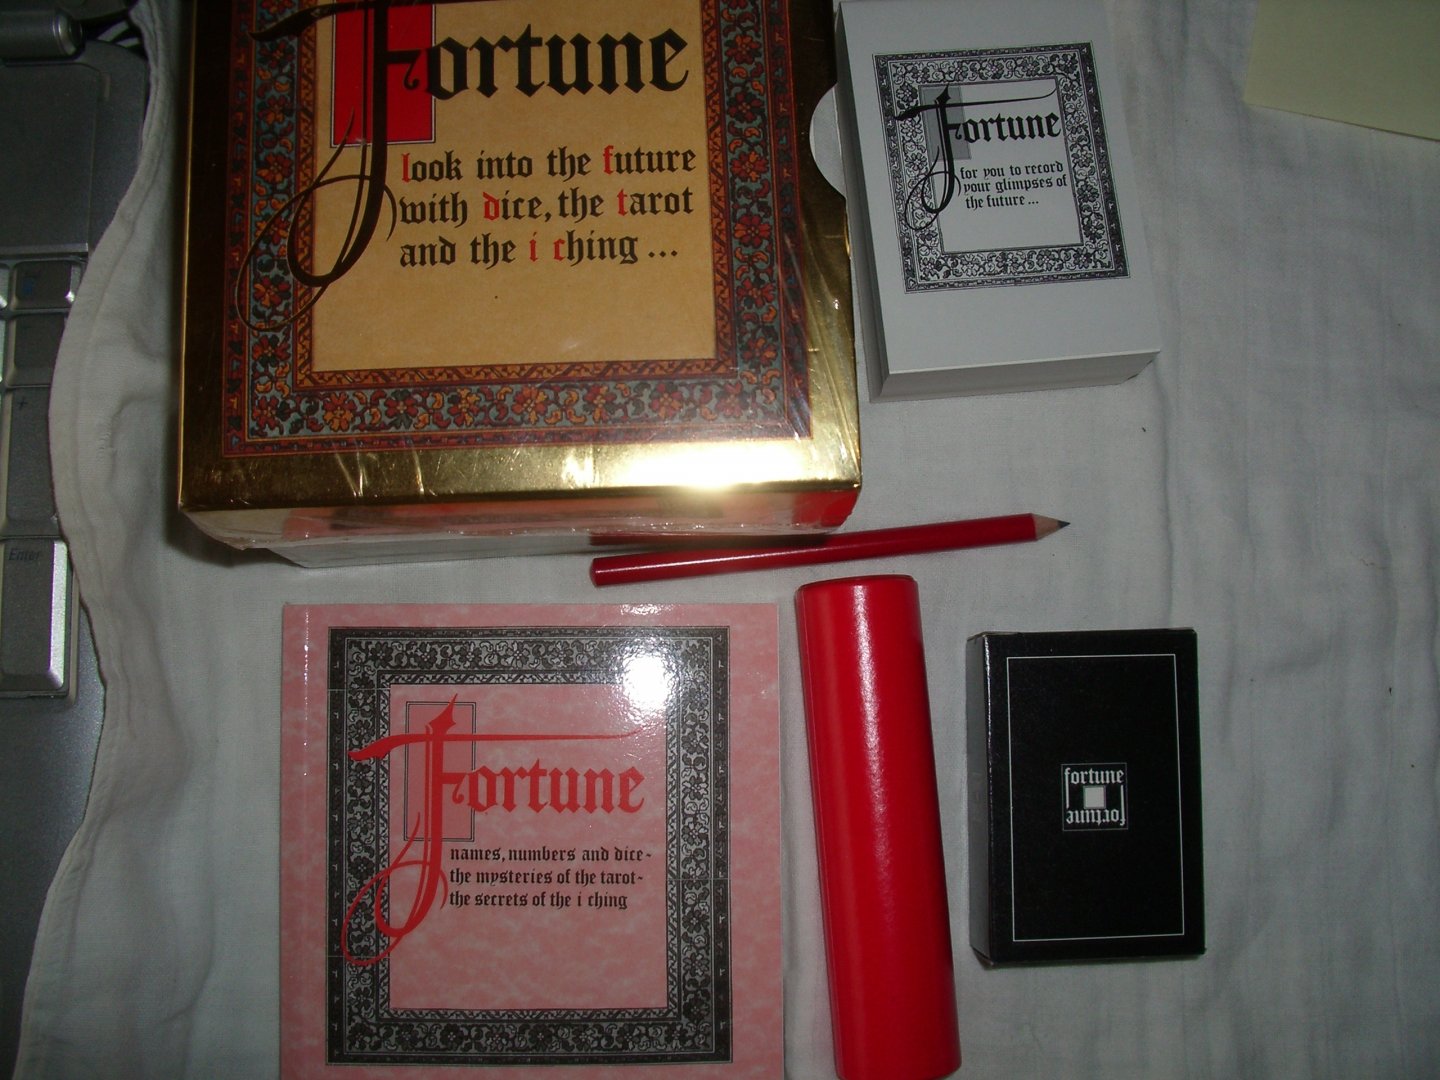 King, Francis X. - Fortune. Names numbers and dice-the mysteries of the tarot-the secrets of the i ching